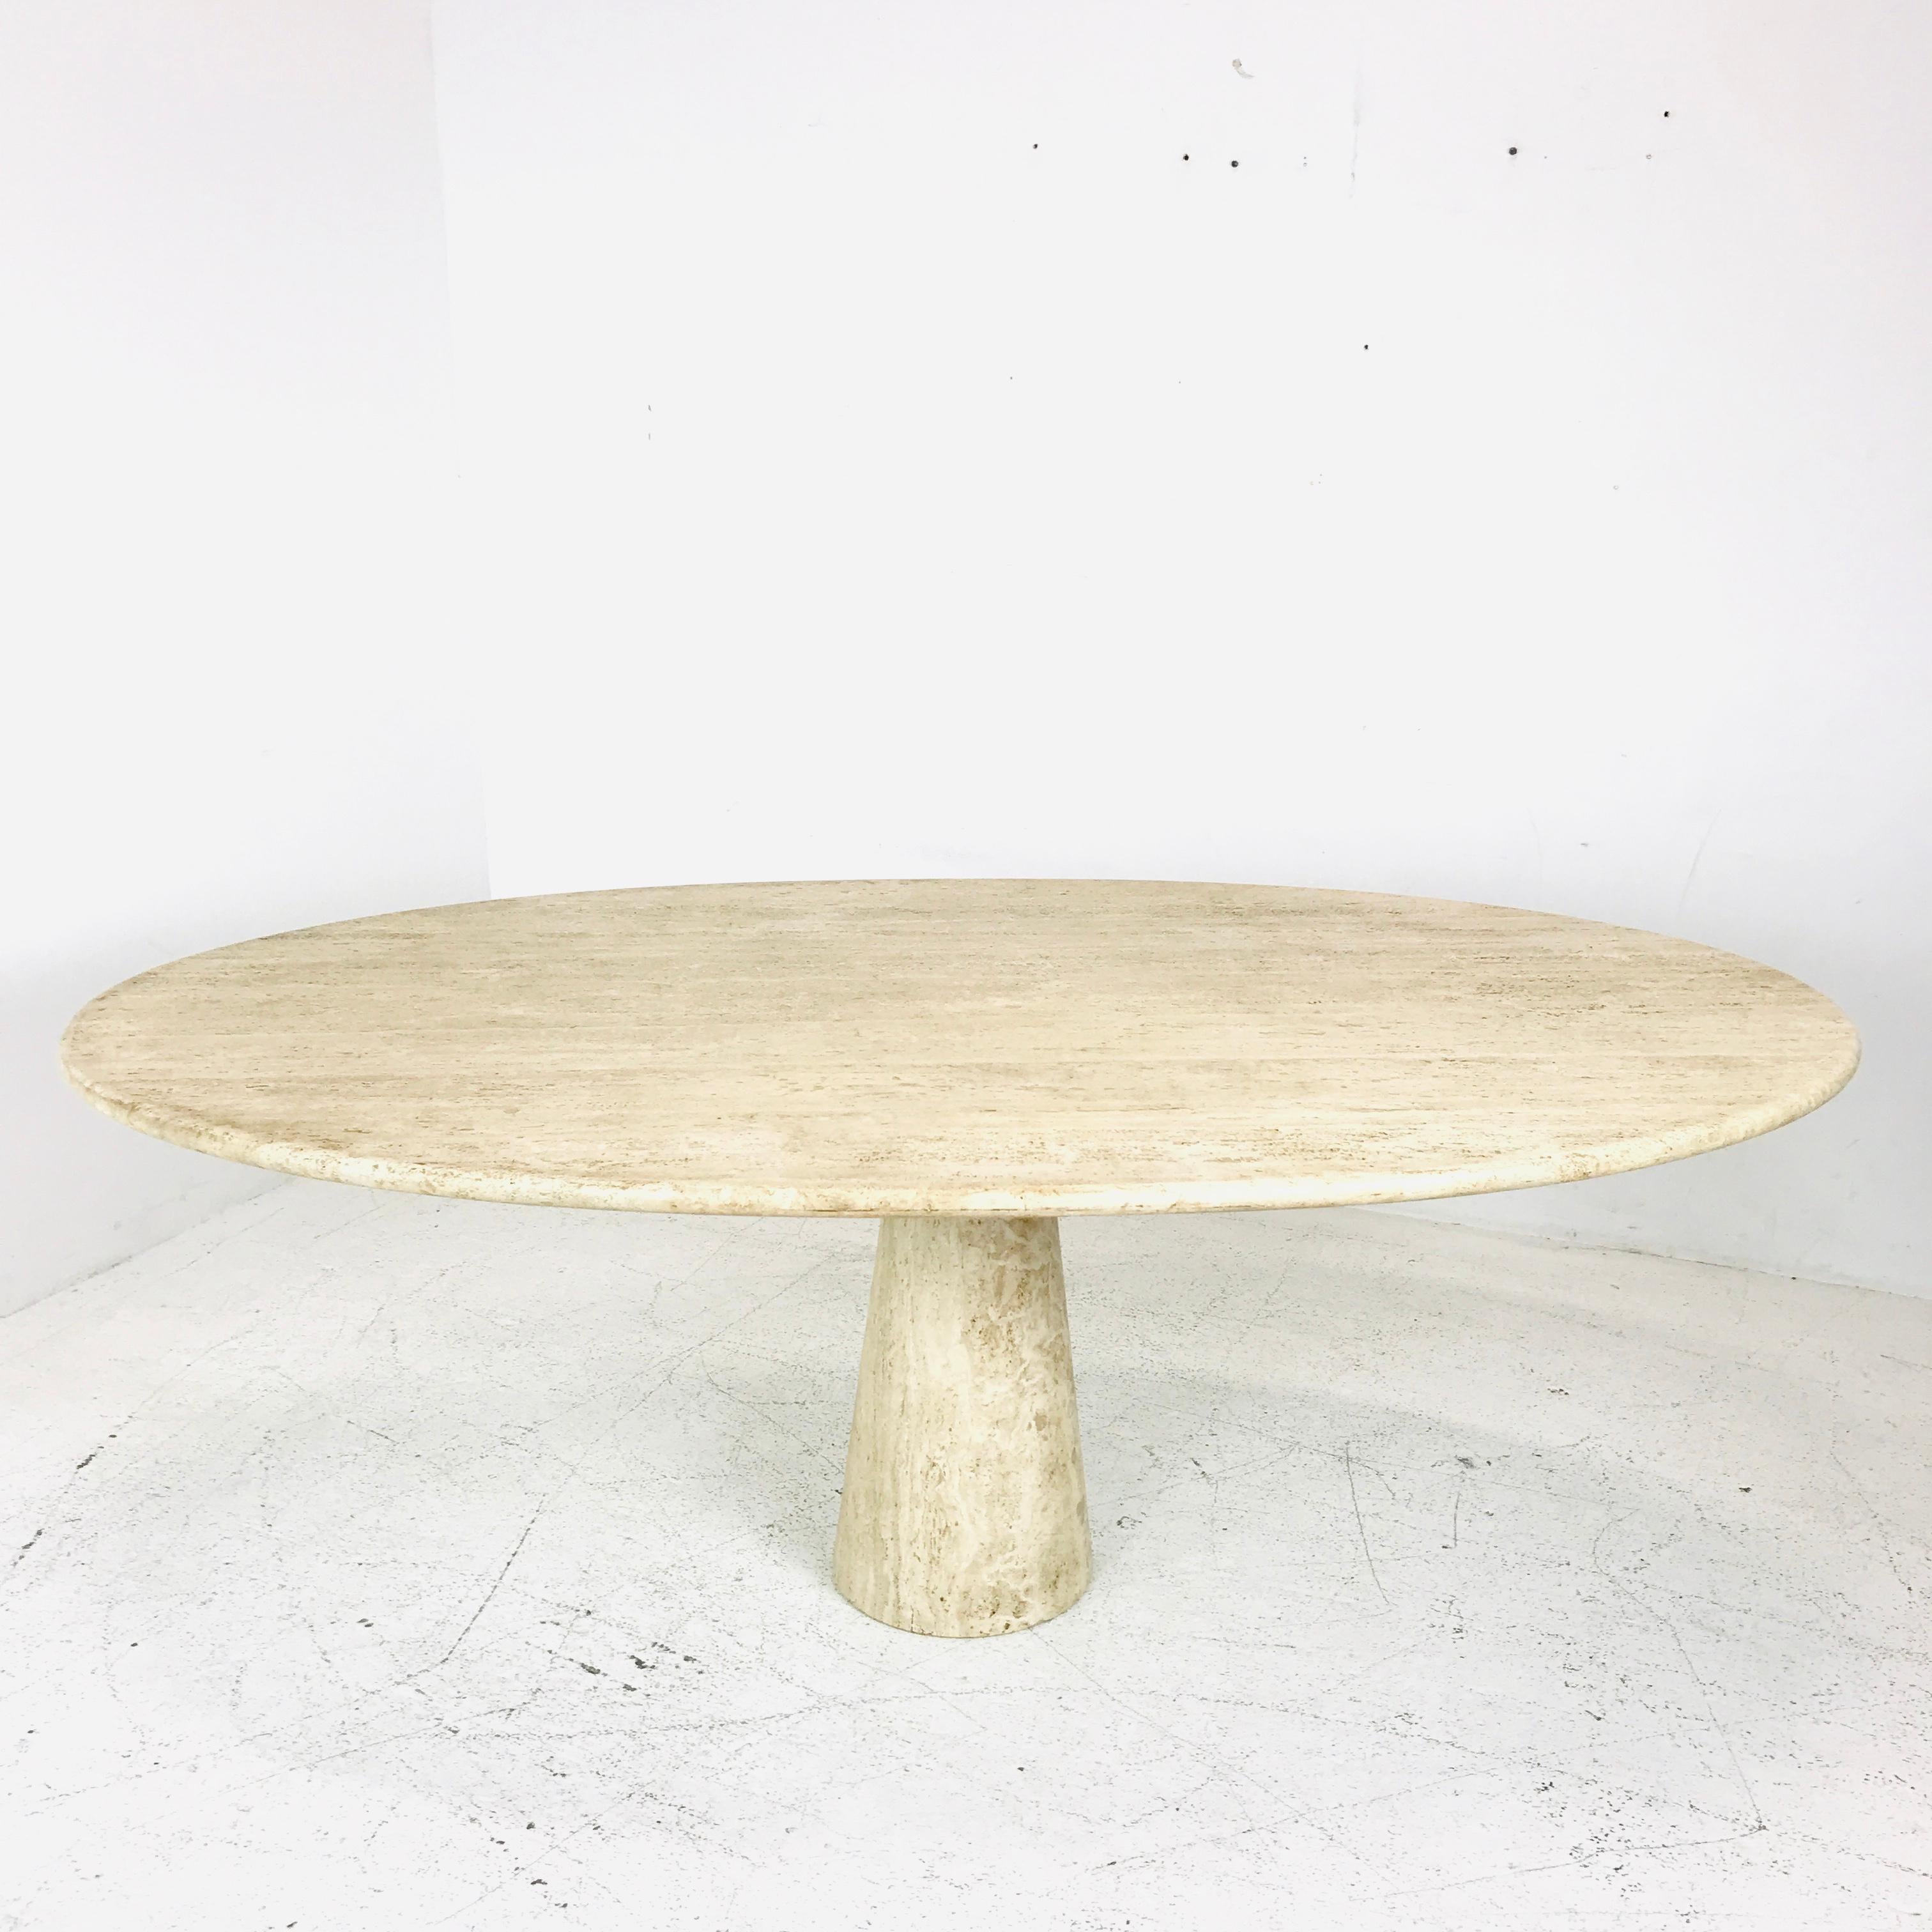 20th Century Angelo Mangiarotti Style Travertine Marble Oval Dining Table